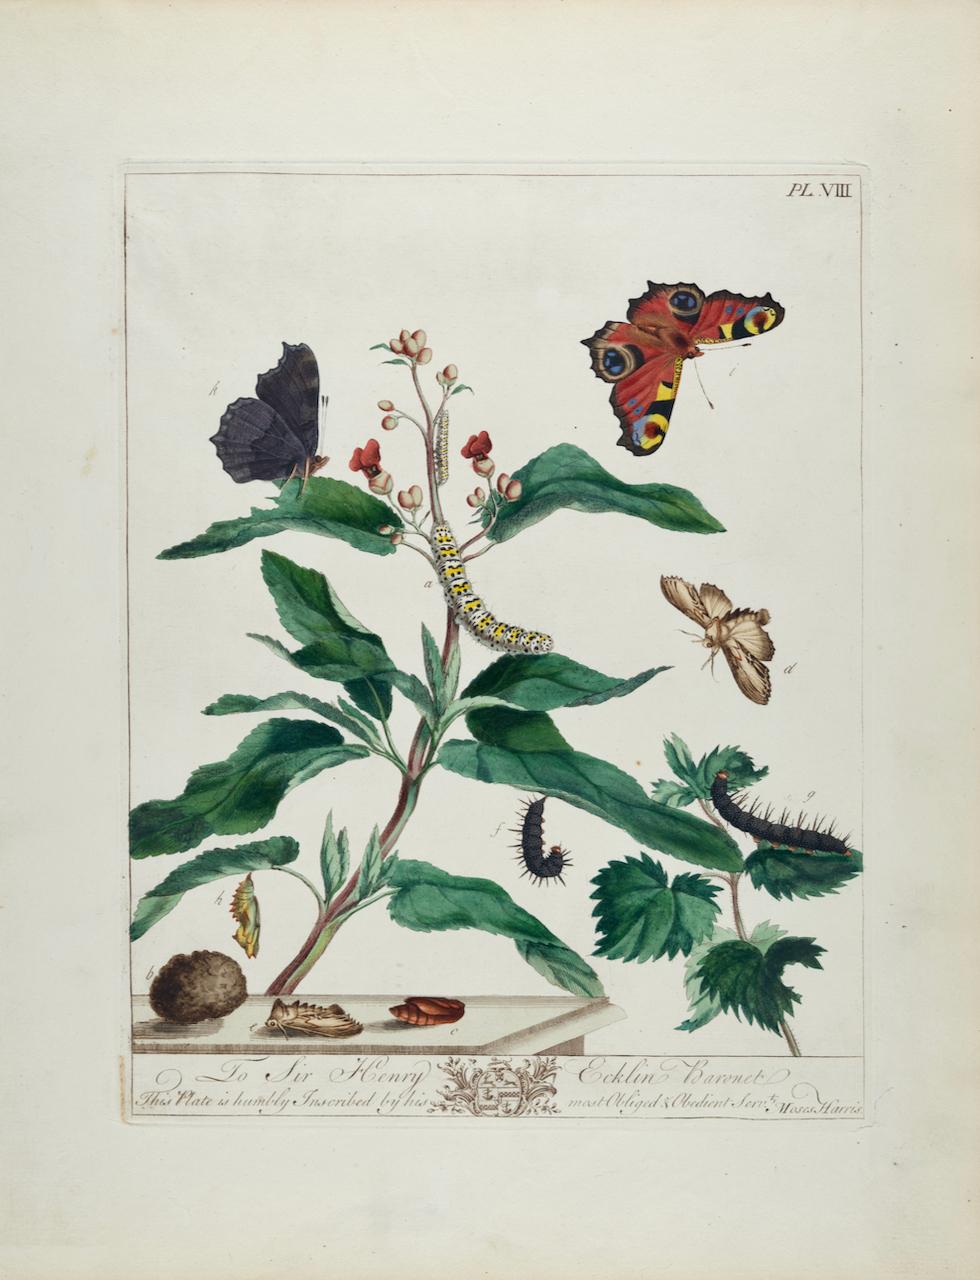 Moses Harris Landscape Print - Peacock Butterfly & Moth: A 1st Ed. Hand-colored 18th C. Engraving by M. Harris